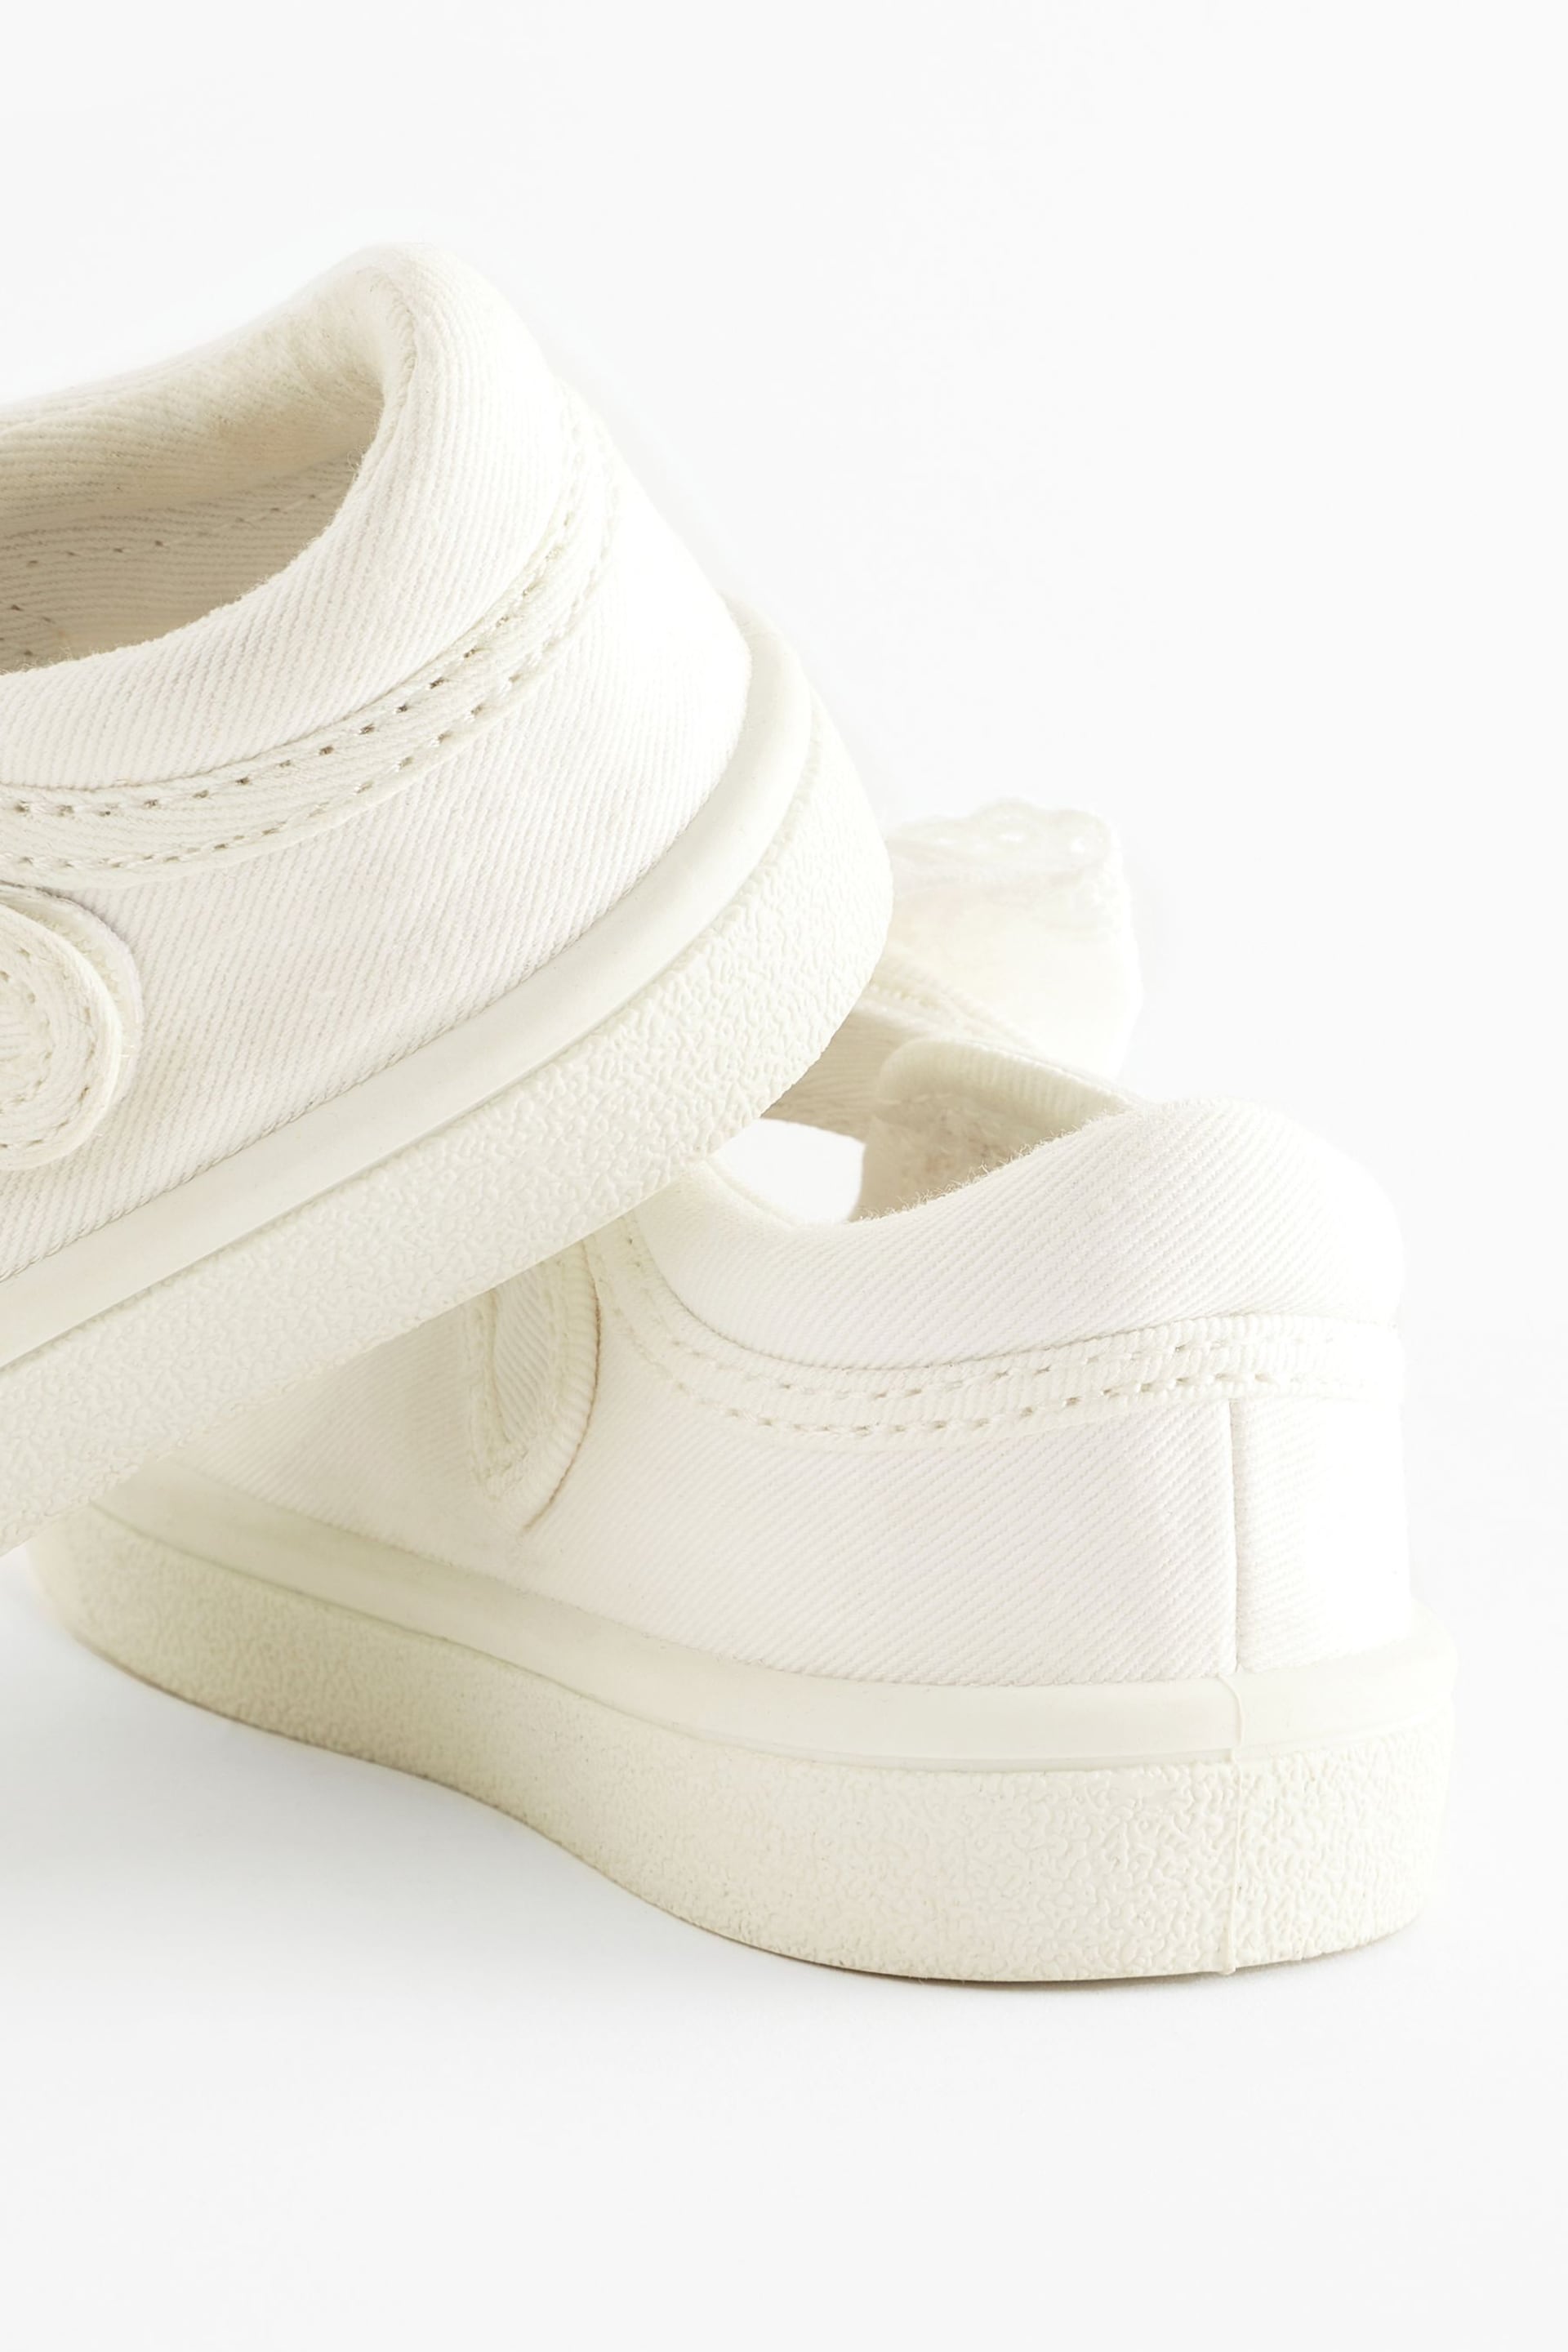 White Wide Fit (G) Machine Washable Mary Jane Shoes - Image 5 of 6